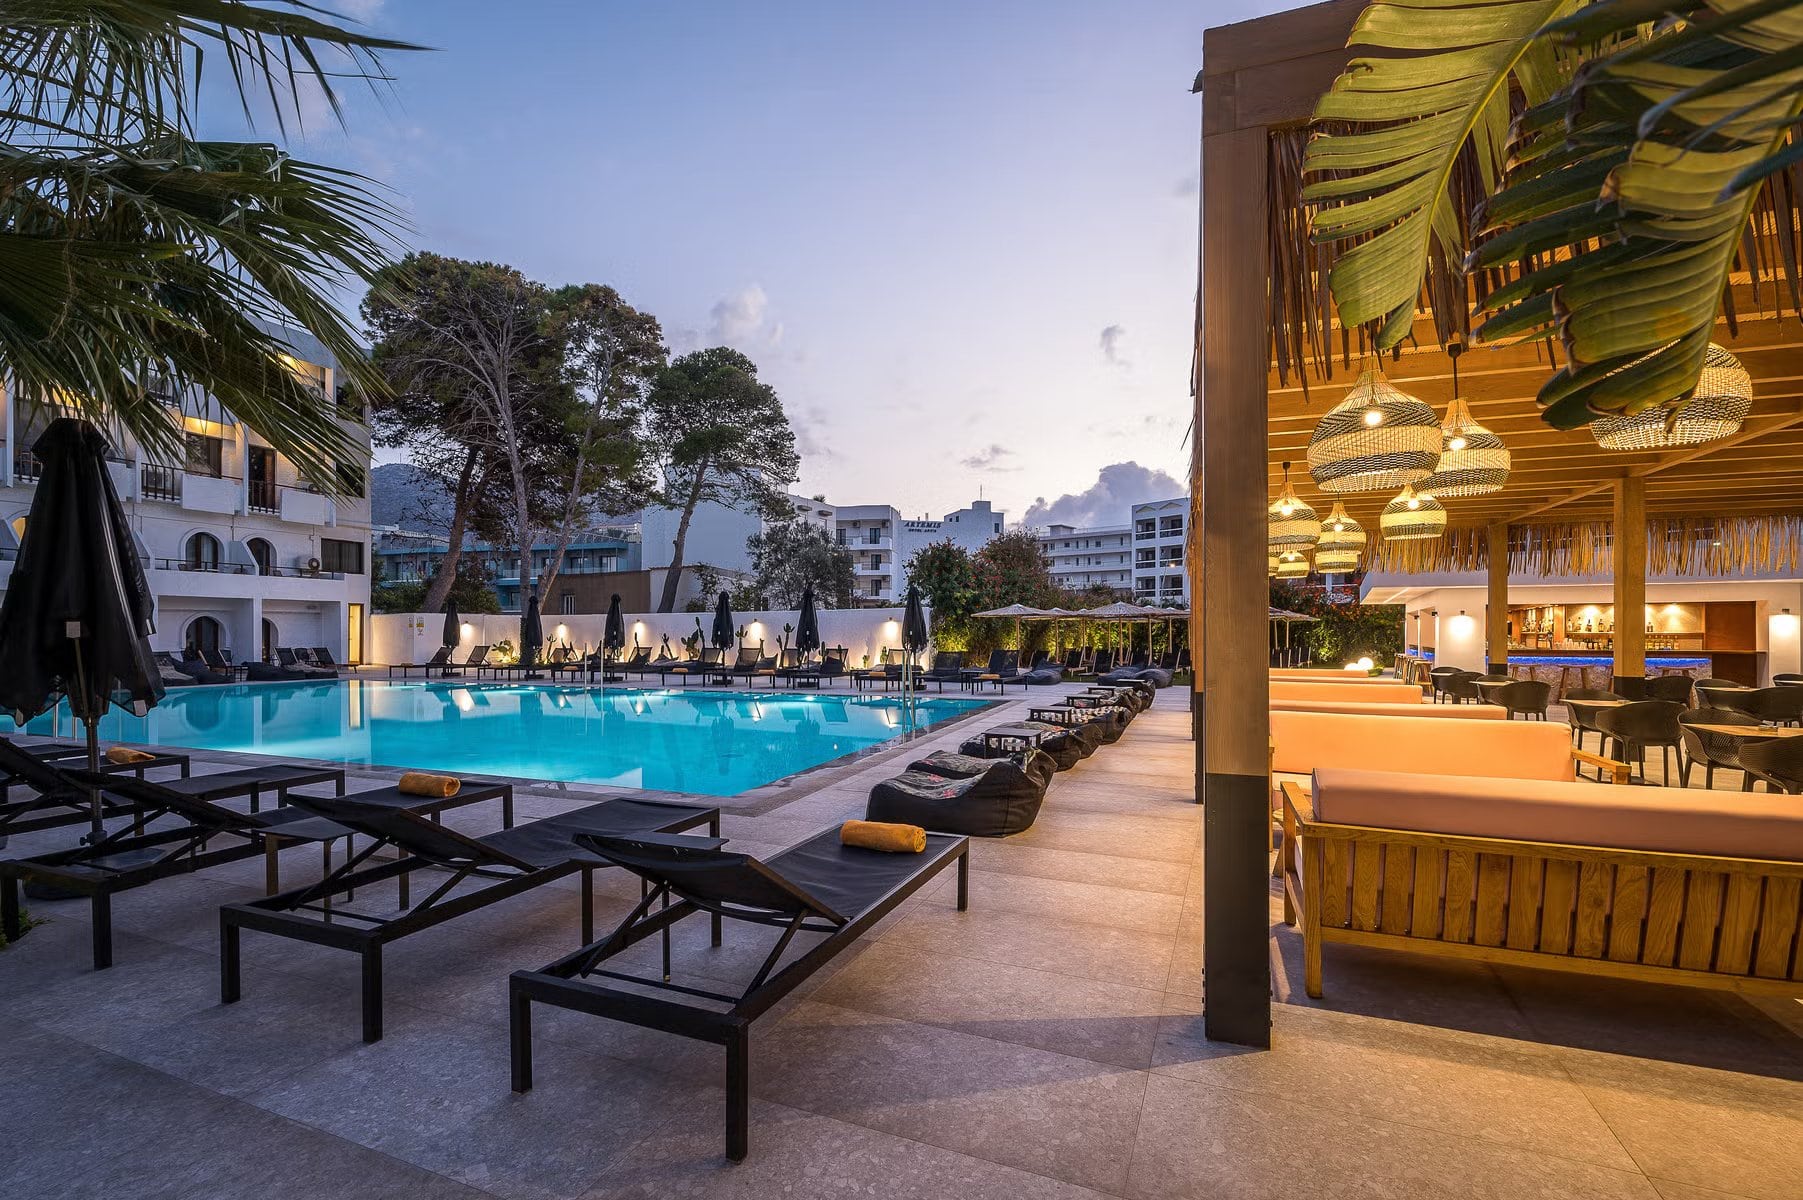 Crete Holiday Deal - All Inclusive Hersonissos Hotel 3